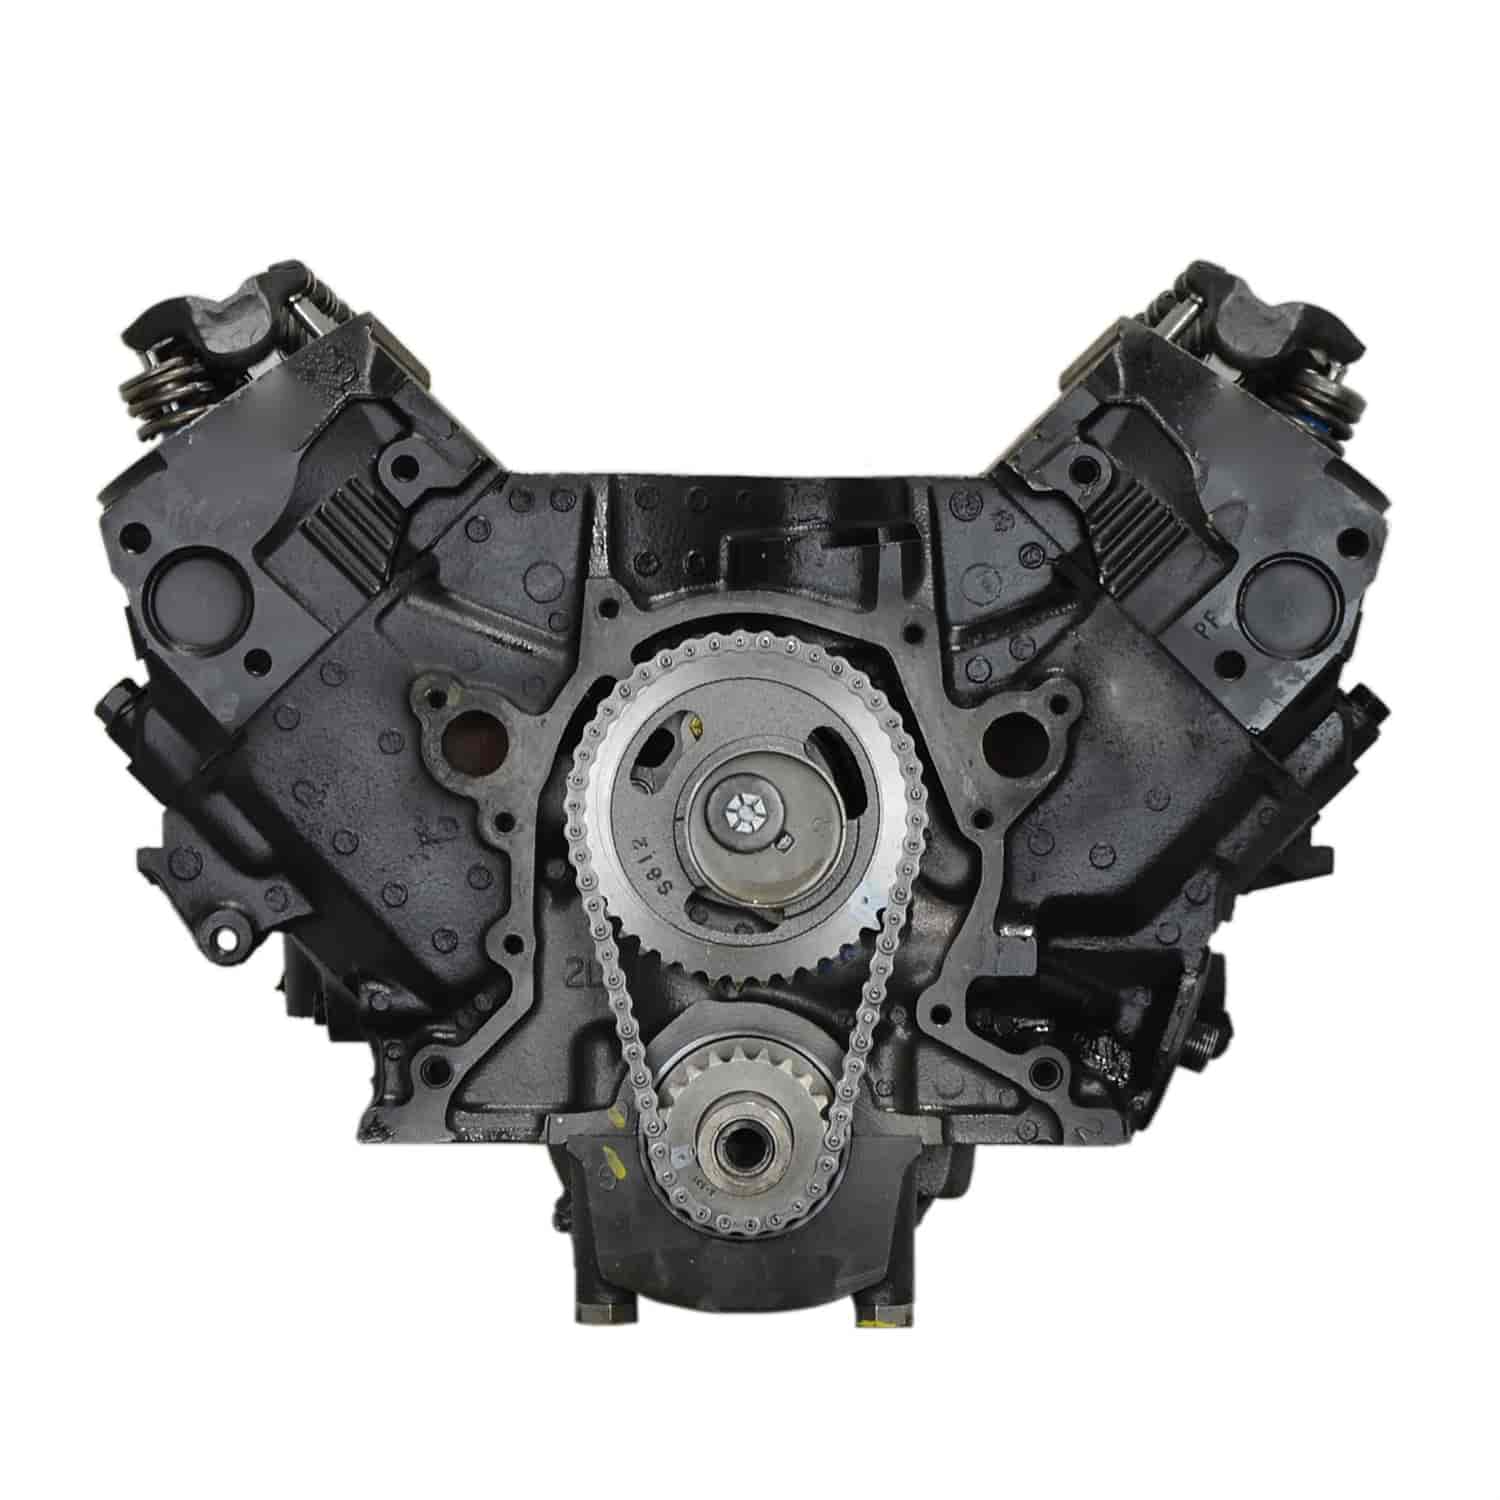 Remanufactured Crate Engine for Marine Applications with 1988-1994 Small Block Ford 351W/5.8L